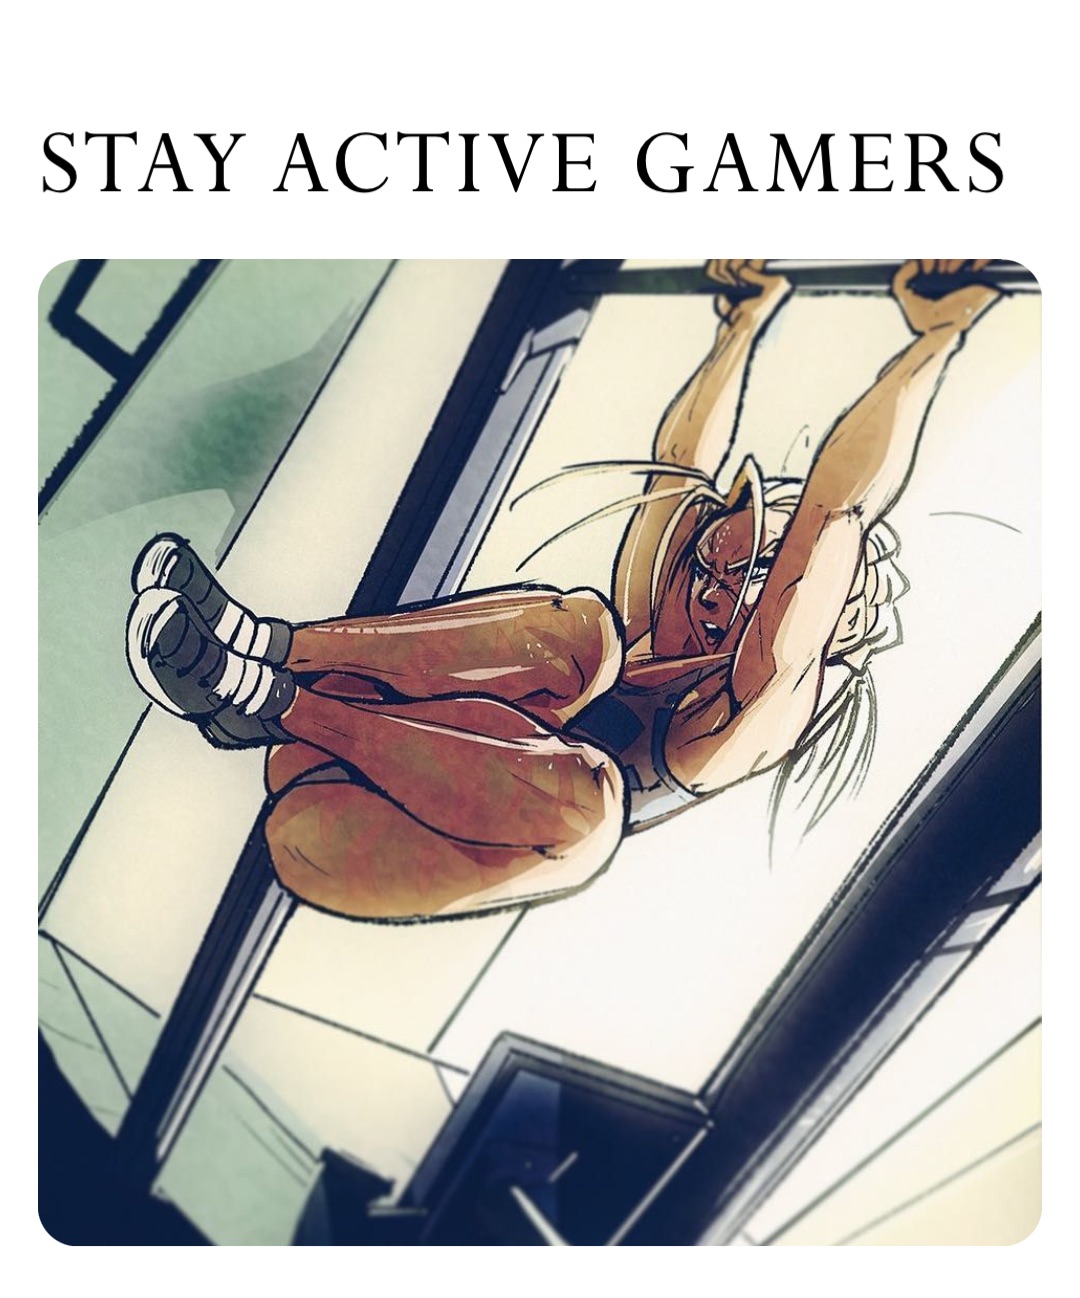 STAY ACTIVE GAMERS